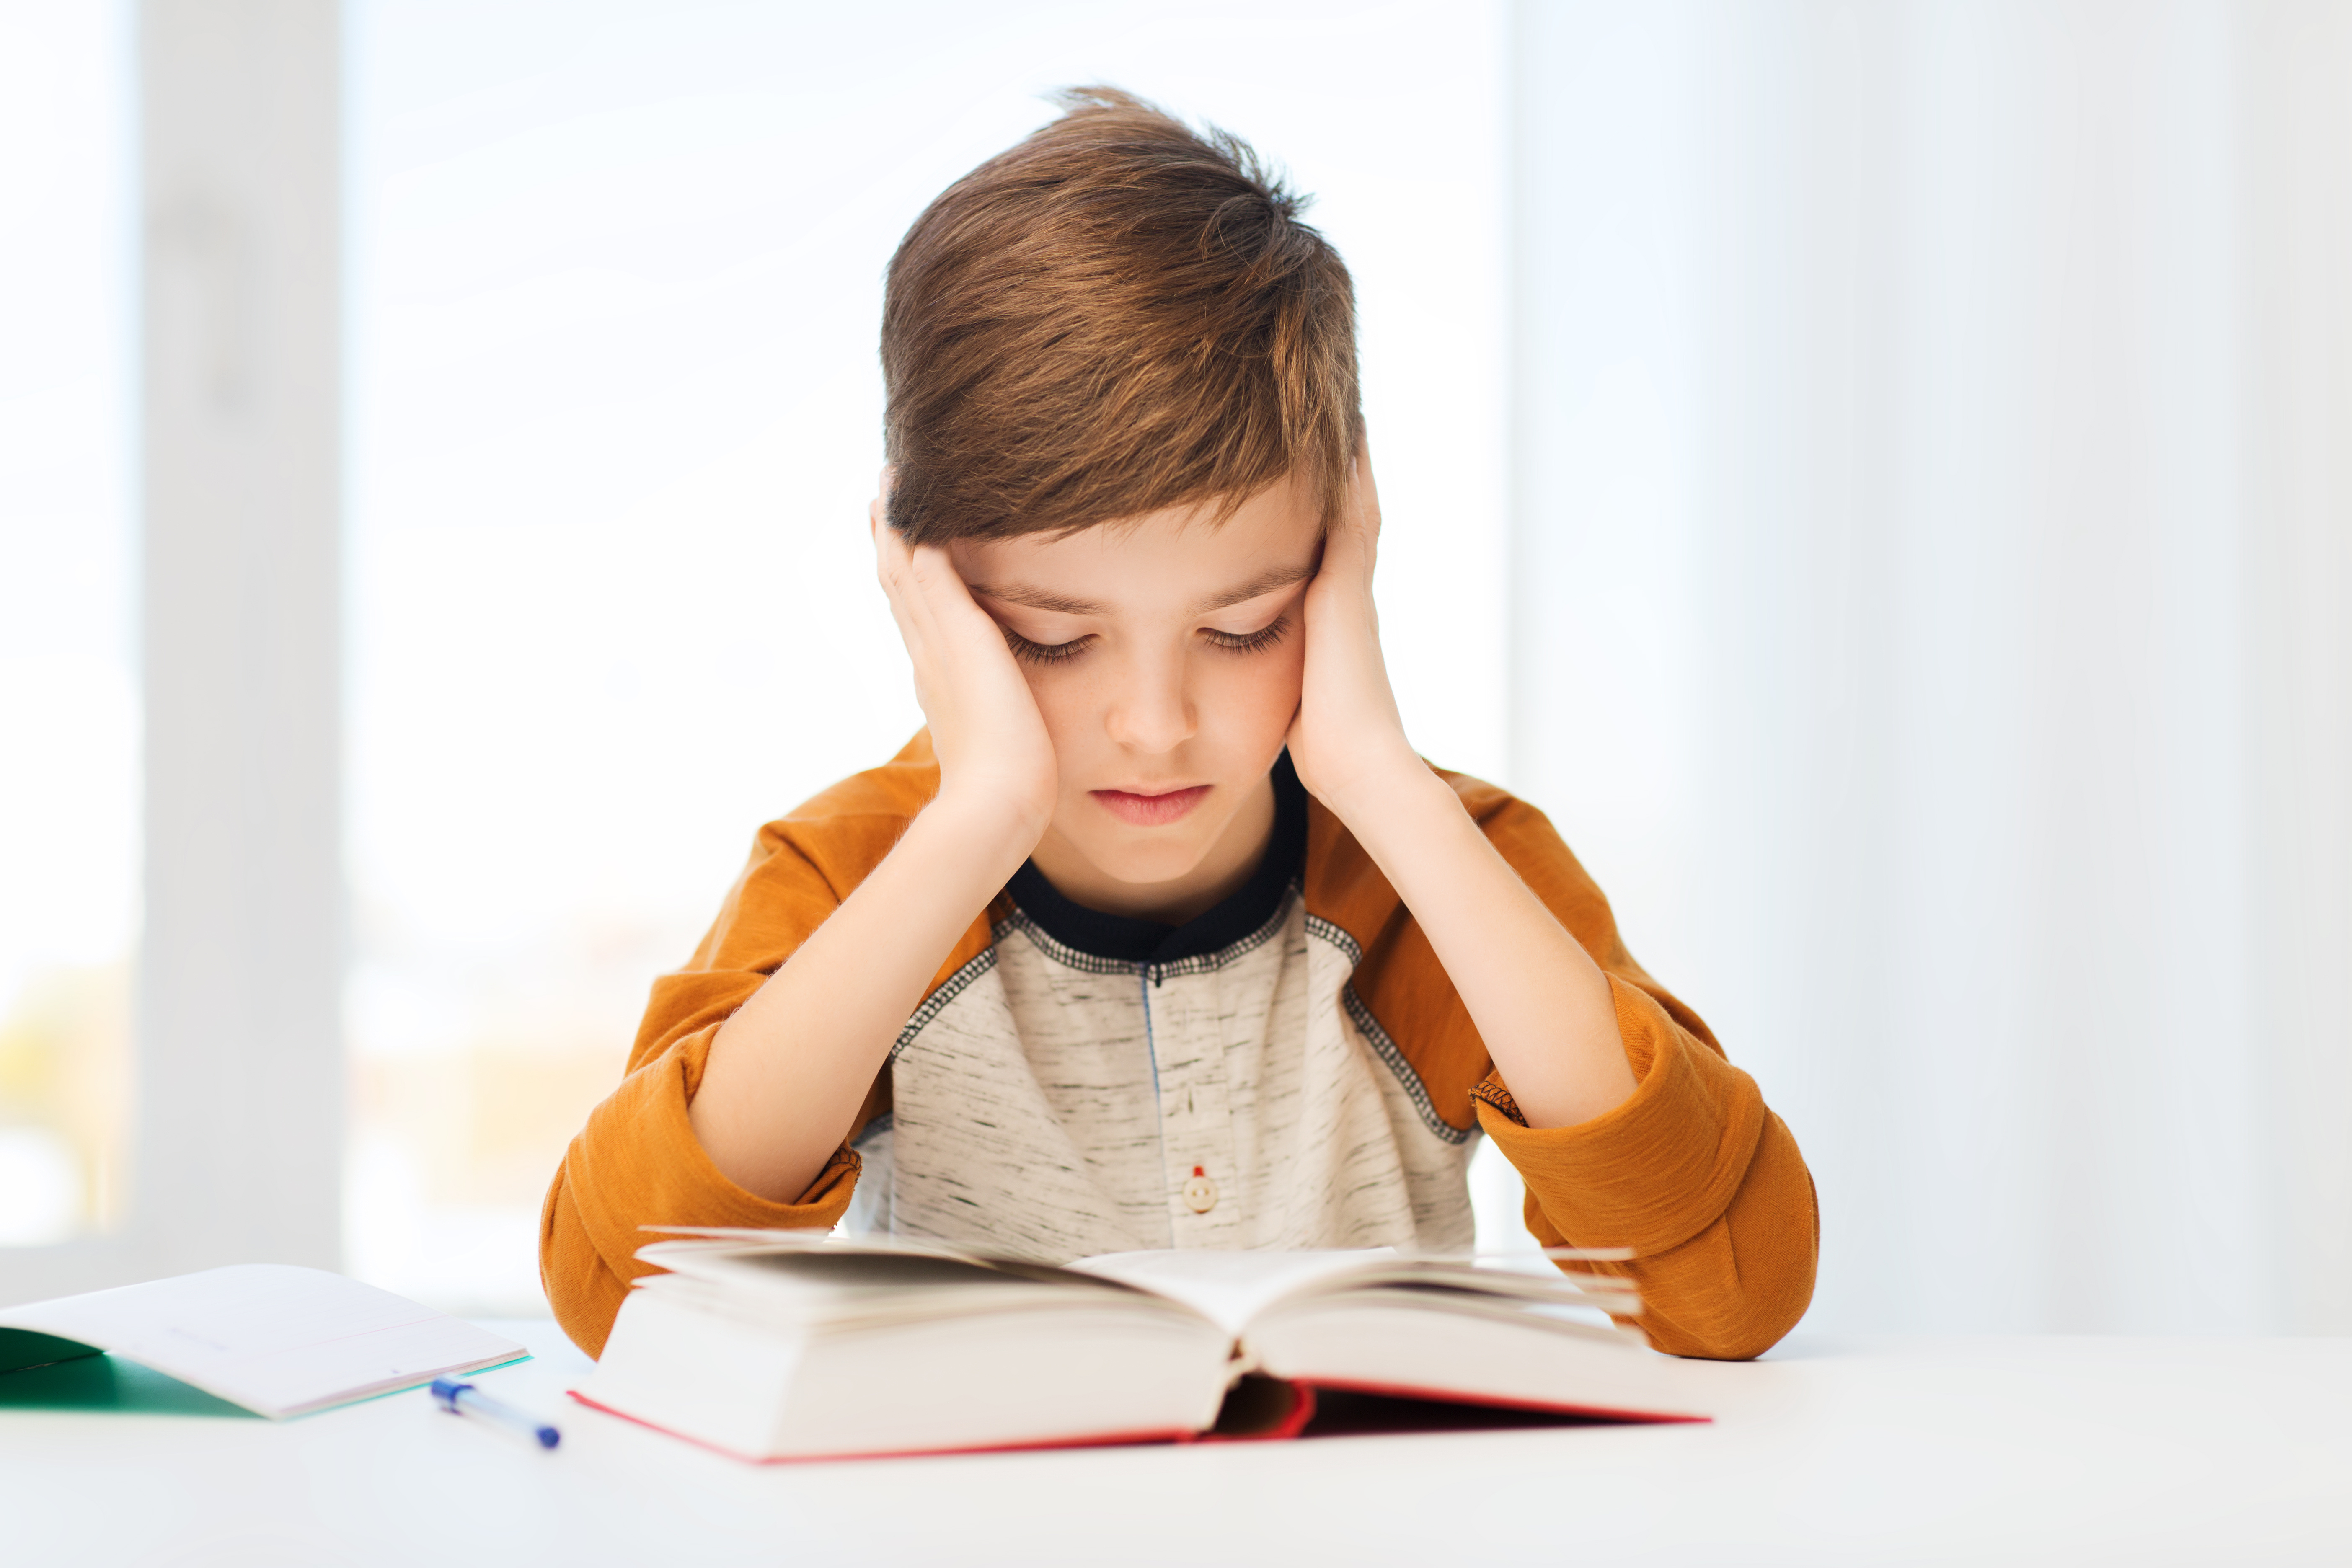 Homework help for students with learning disabilities